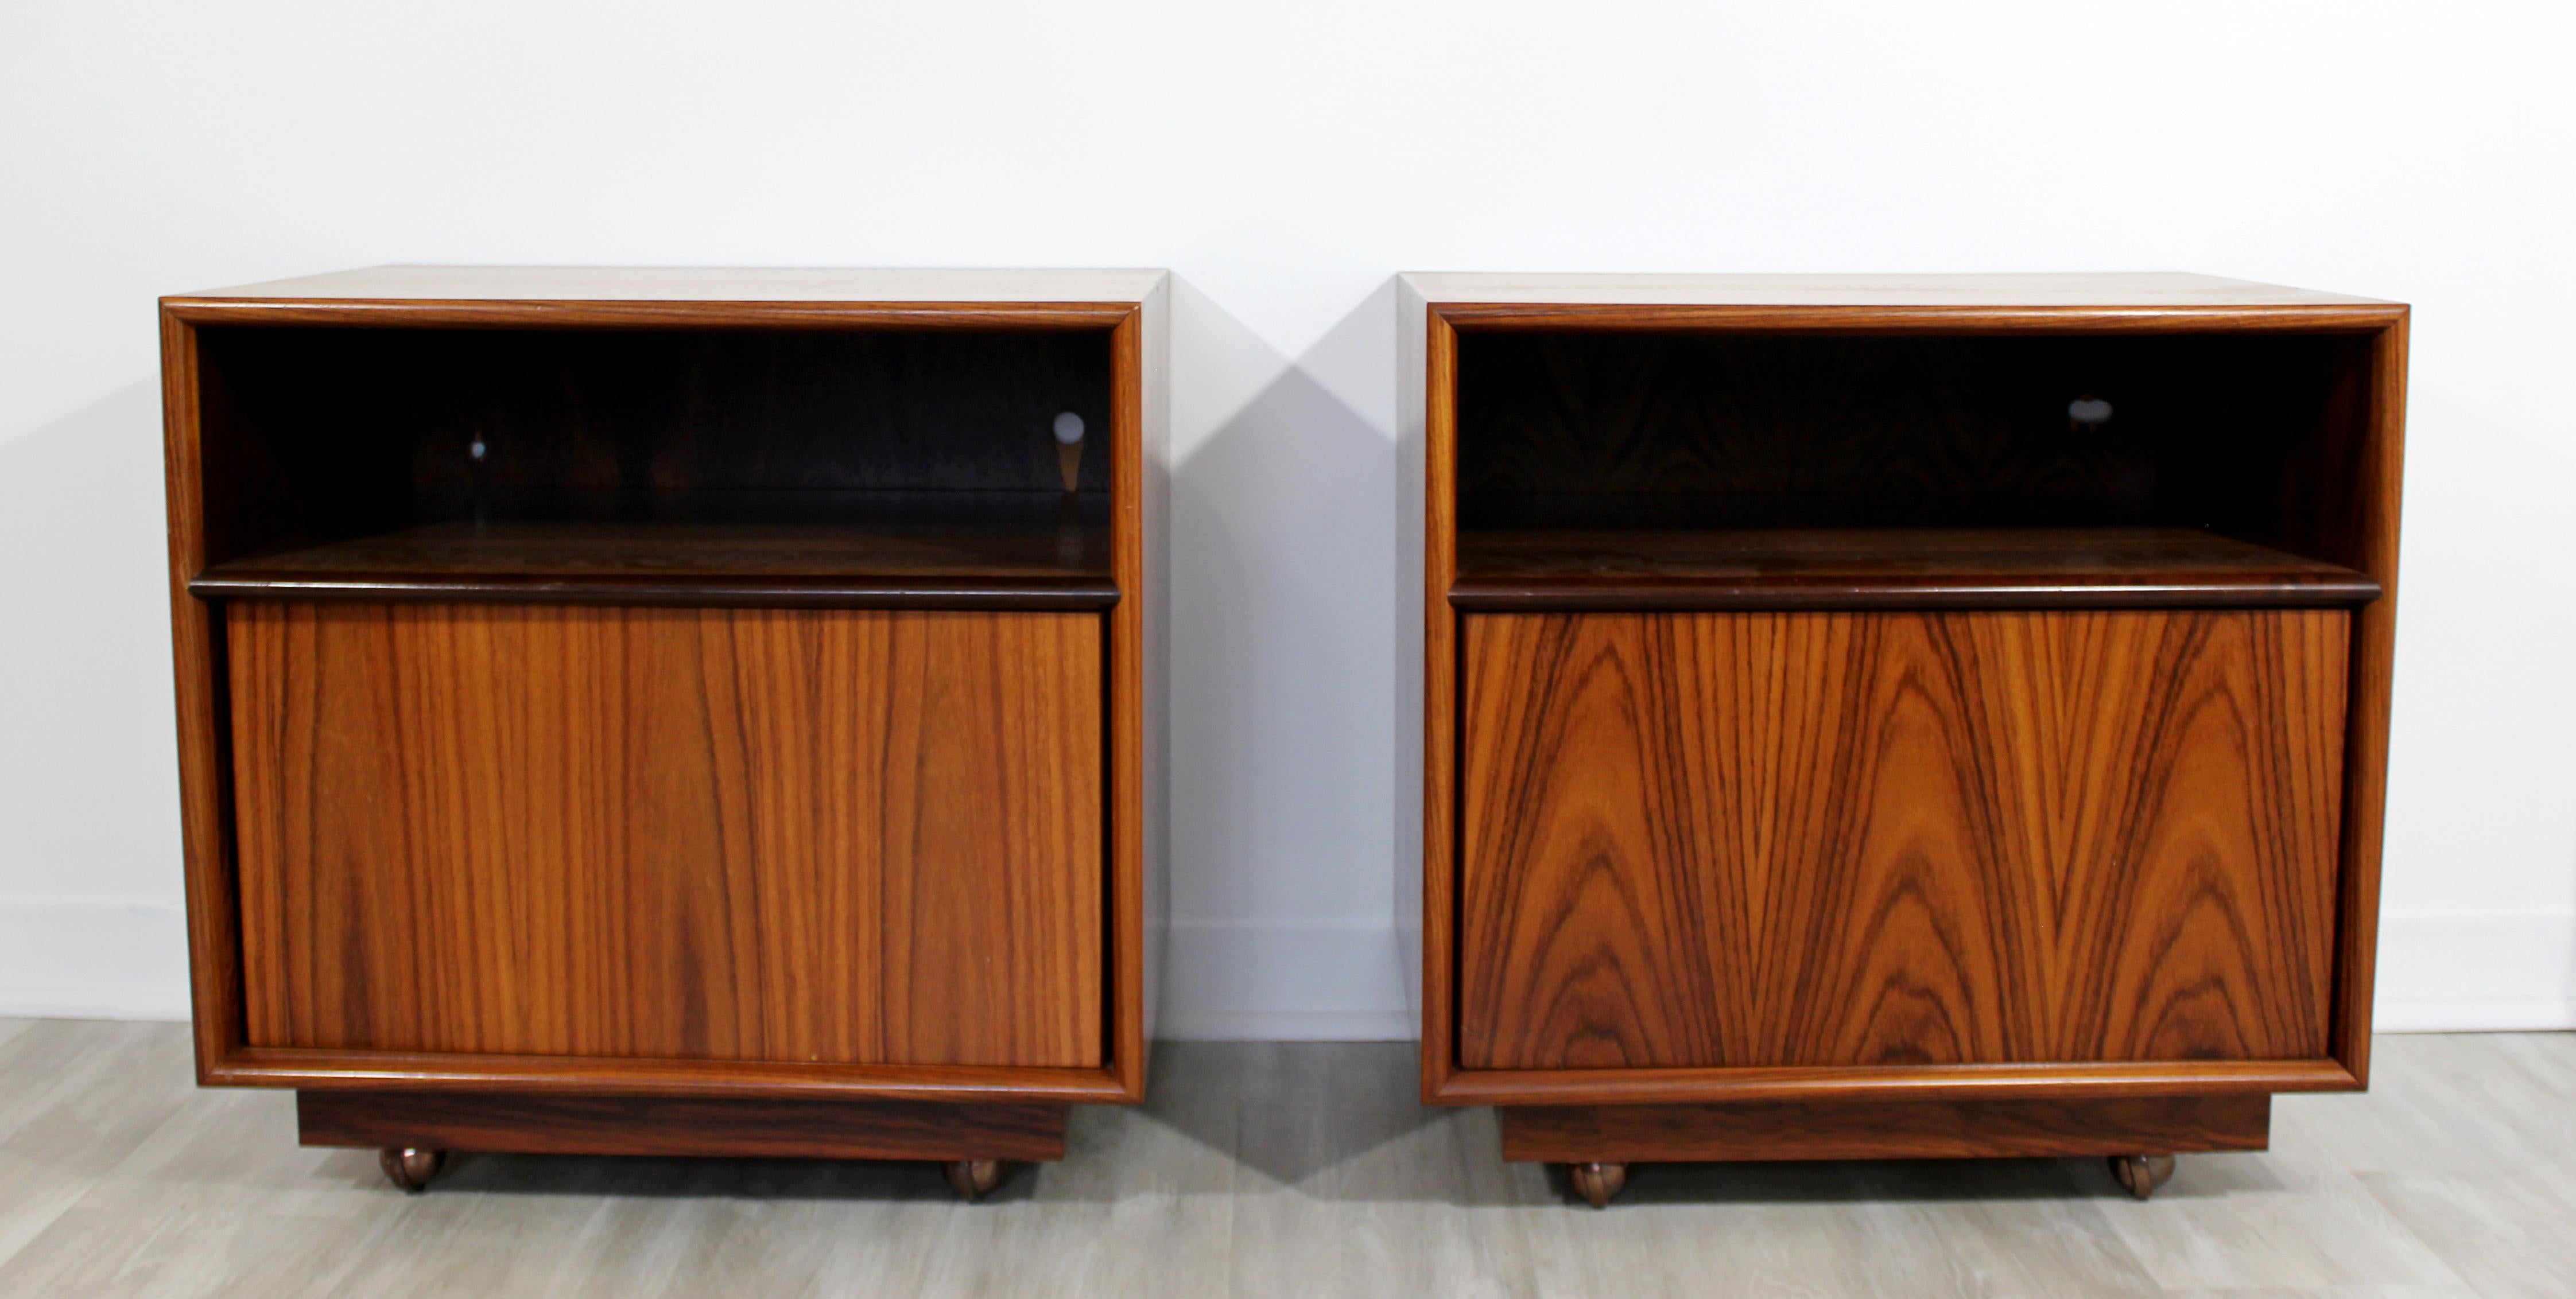 For your consideration is a ravishing, pair of rosewood nightstands, each with a single shelf and door, circa 1960s. In very good vintage condition. The dimensions are 23.5